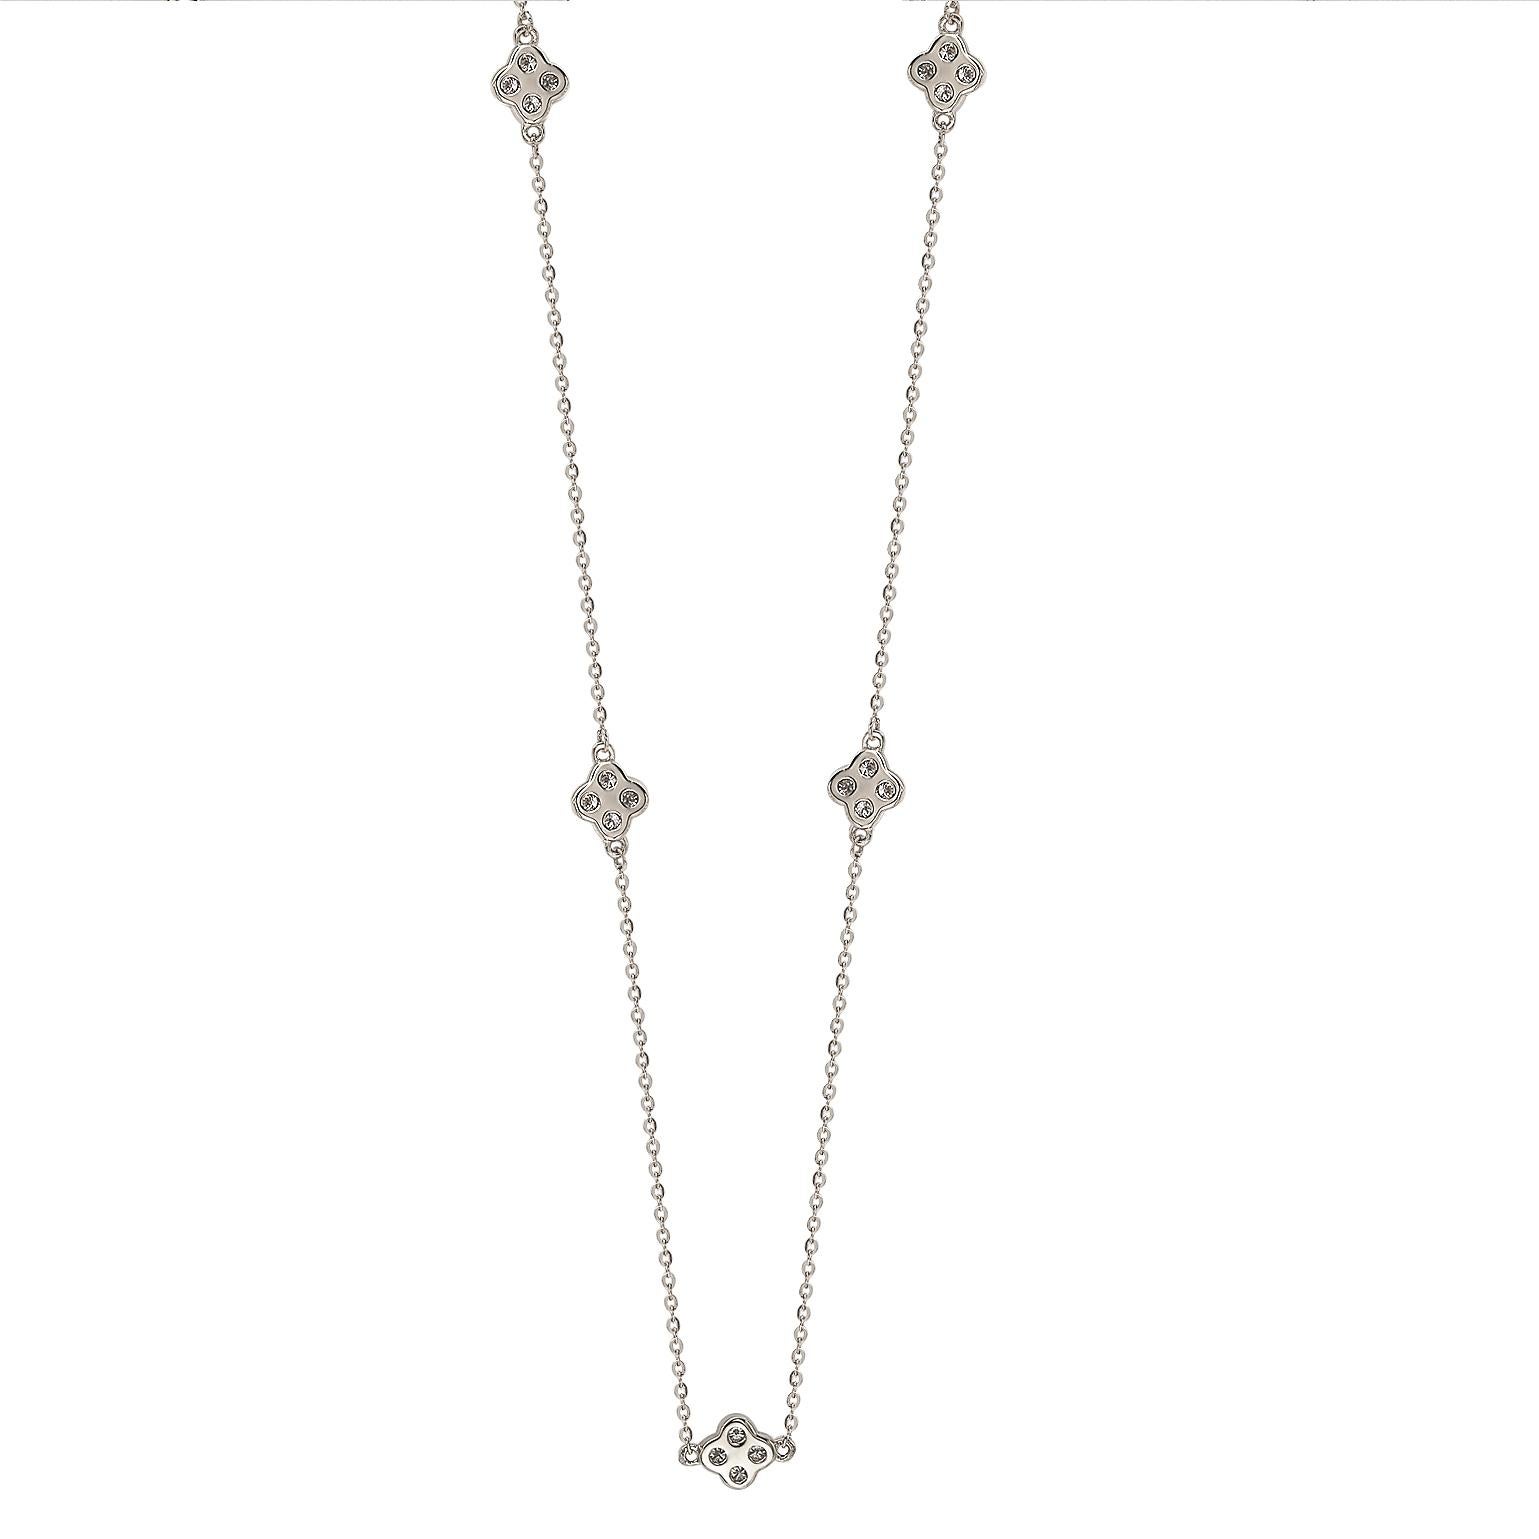 This unique Suzy Levian diamond clover by the yard necklace displays round-cut diamonds on 14 karat white gold setting. This gorgeous necklace contains 20, 1.75 mm white round cut diamonds totaling .40 cttw. The necklace has 7 clovers, each clover